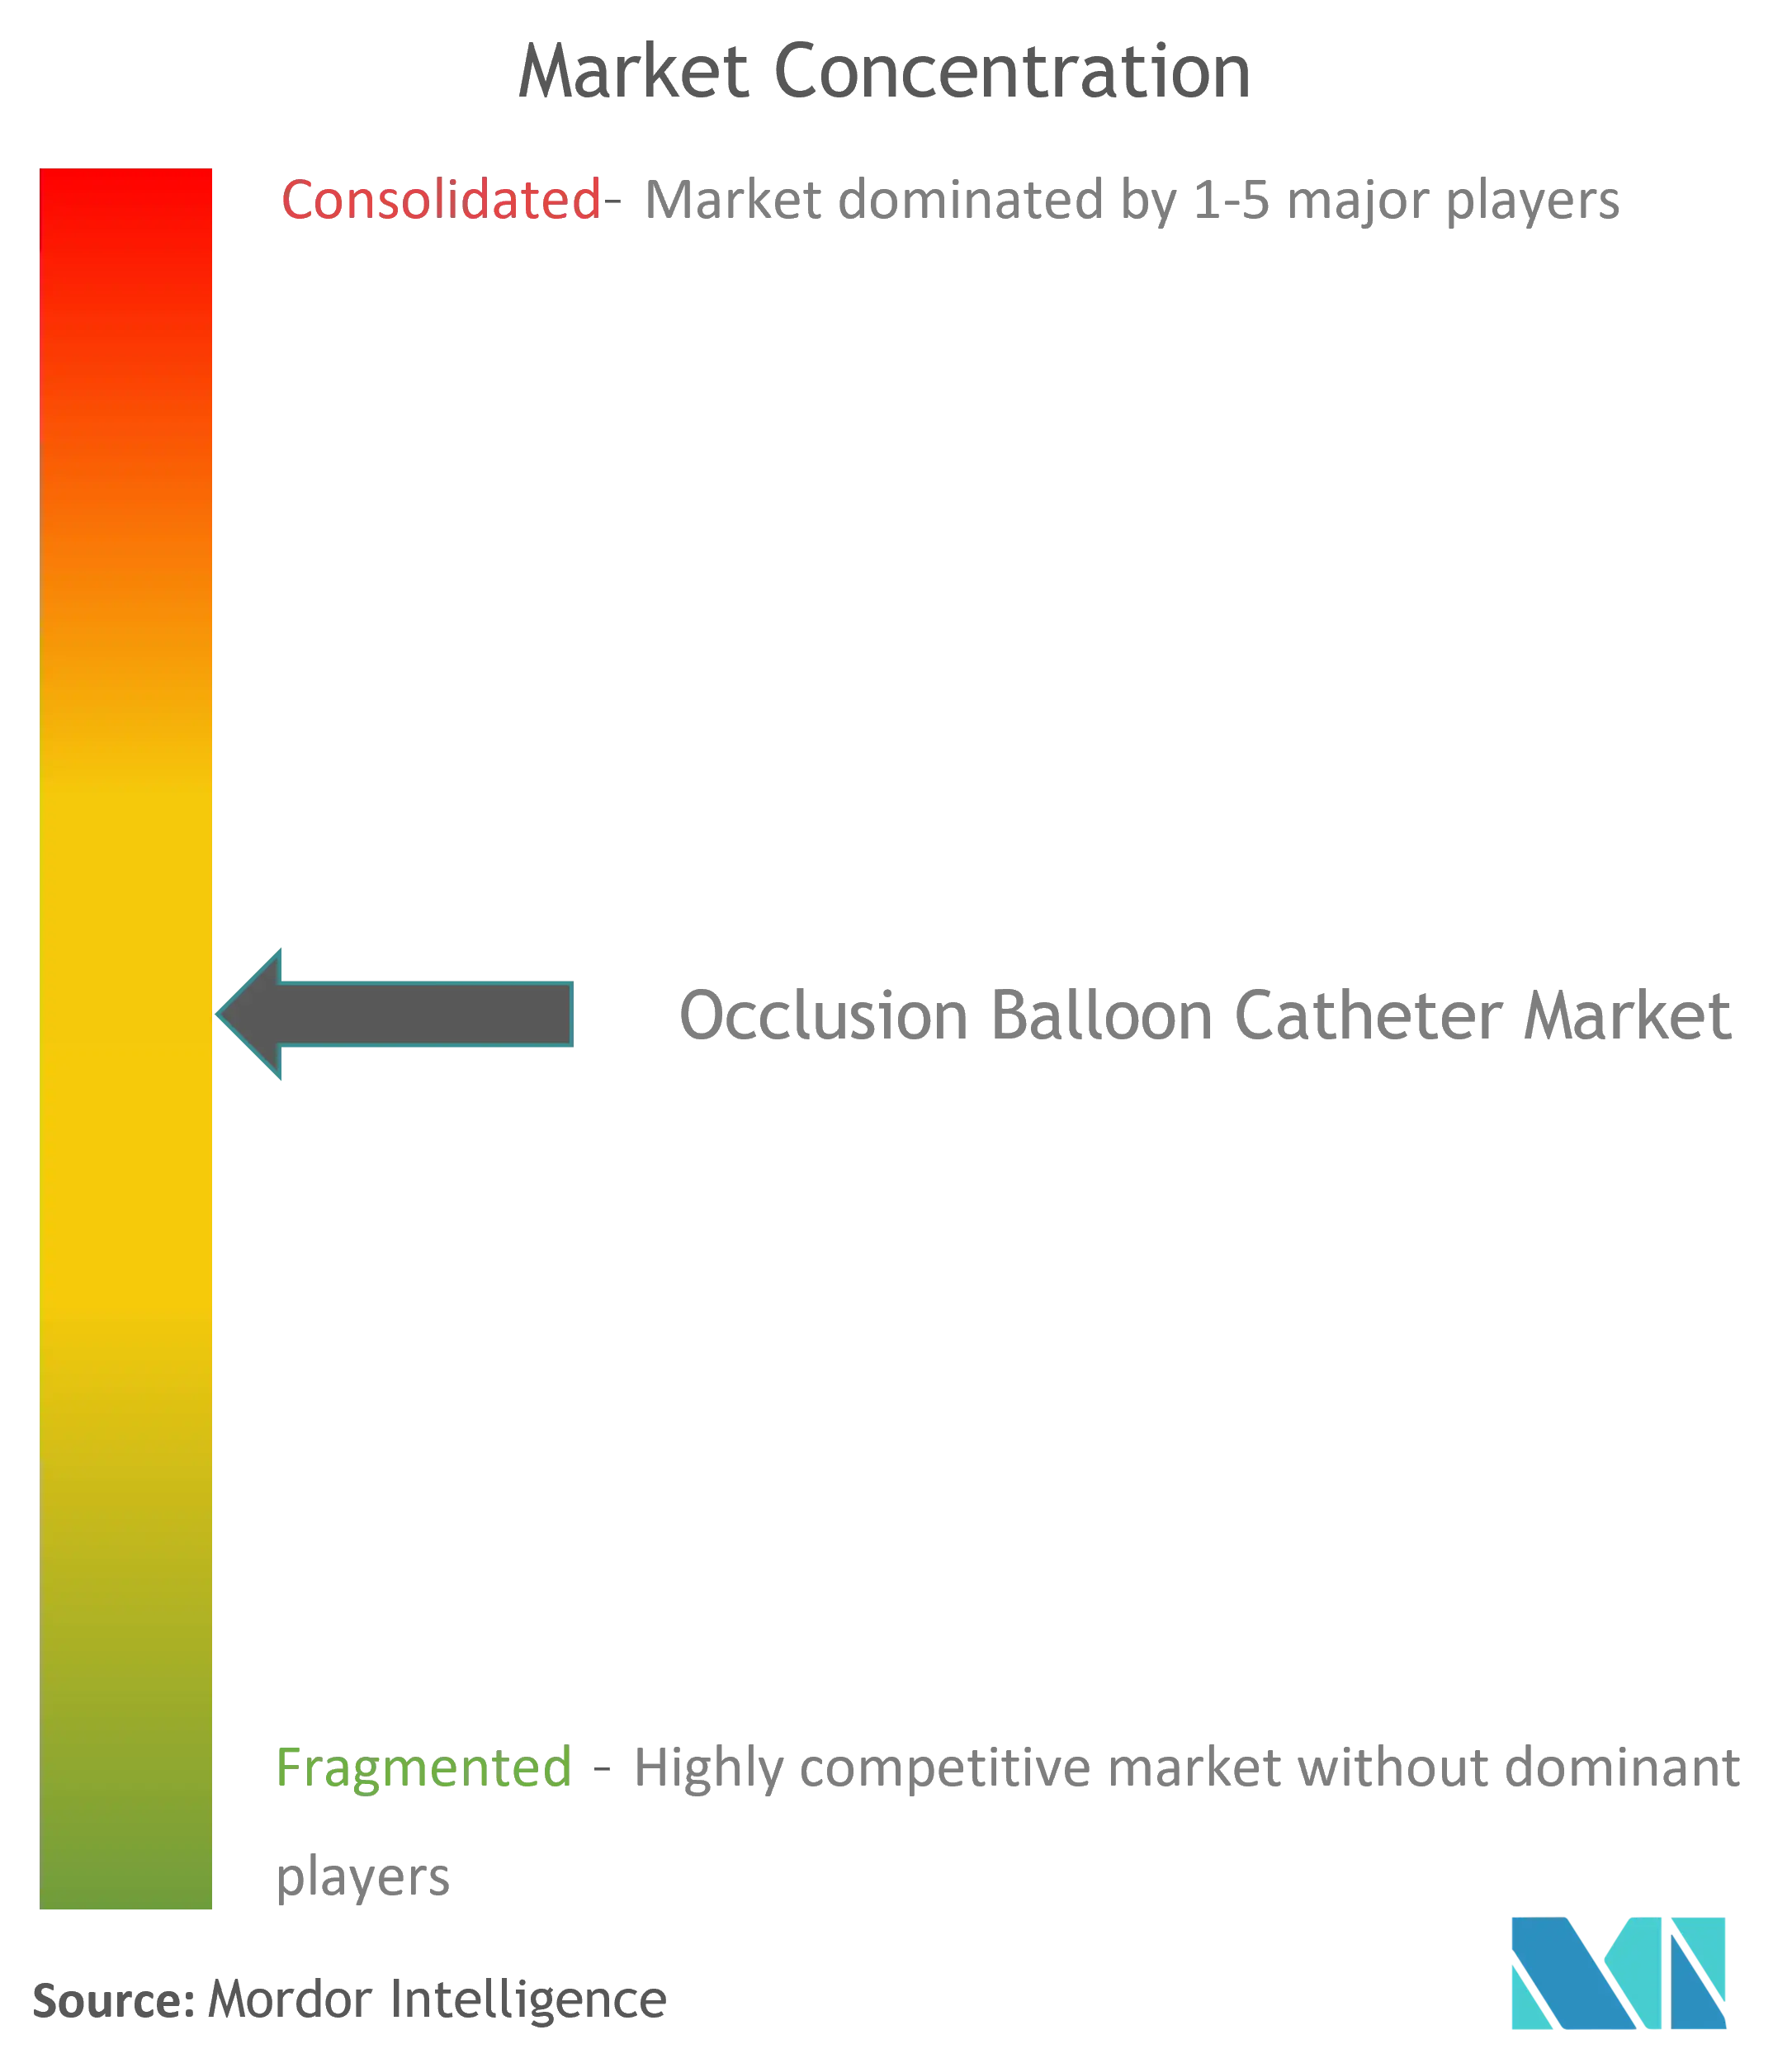 Occlusion Balloon Catheter Market Concentration